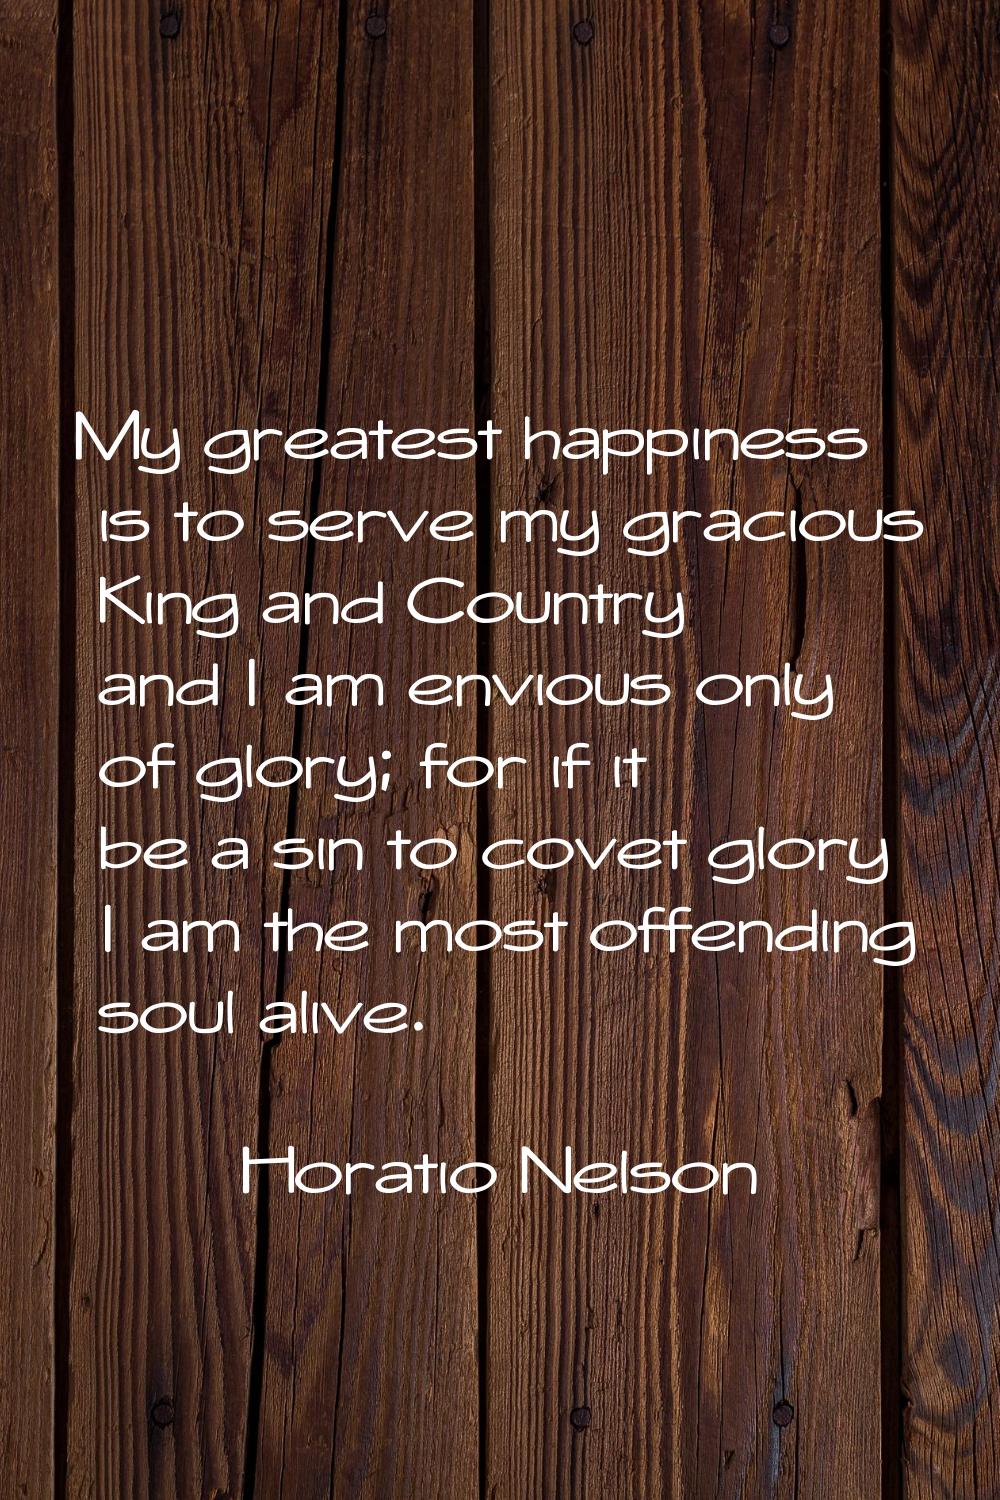 My greatest happiness is to serve my gracious King and Country and I am envious only of glory; for 